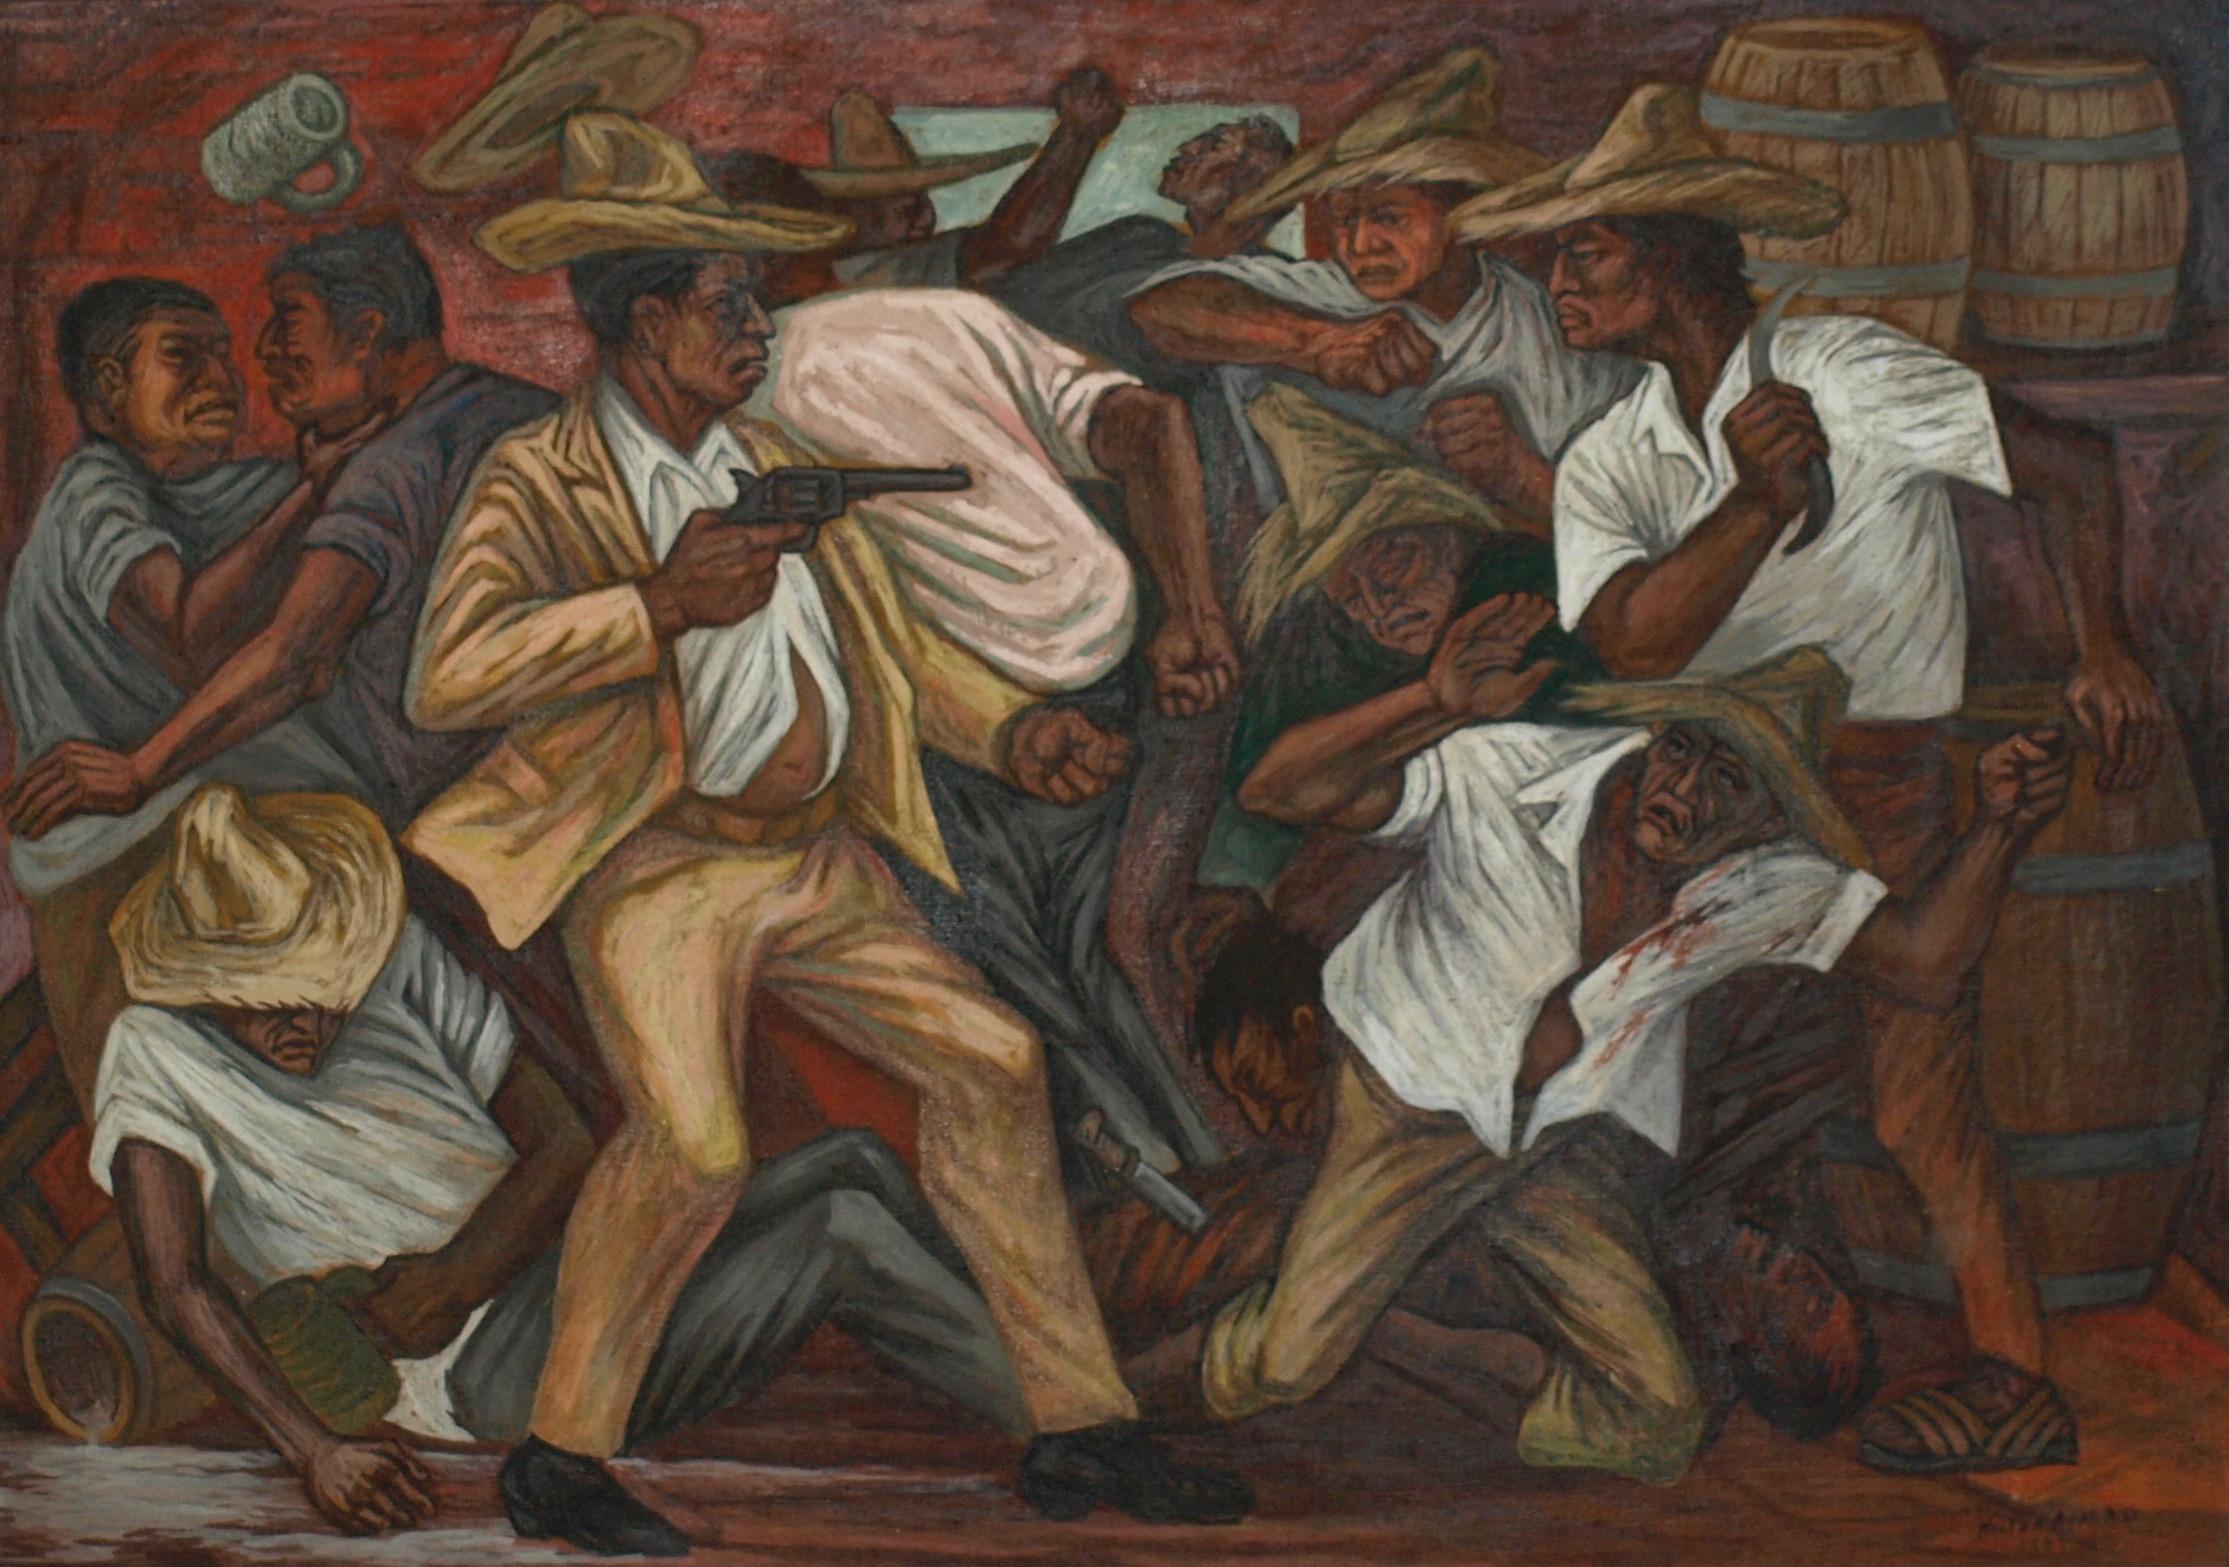 Hector Ayala Figurative Painting - Rowdy Mexican Cantina Brawl with Beer, Men, Guns & Knives